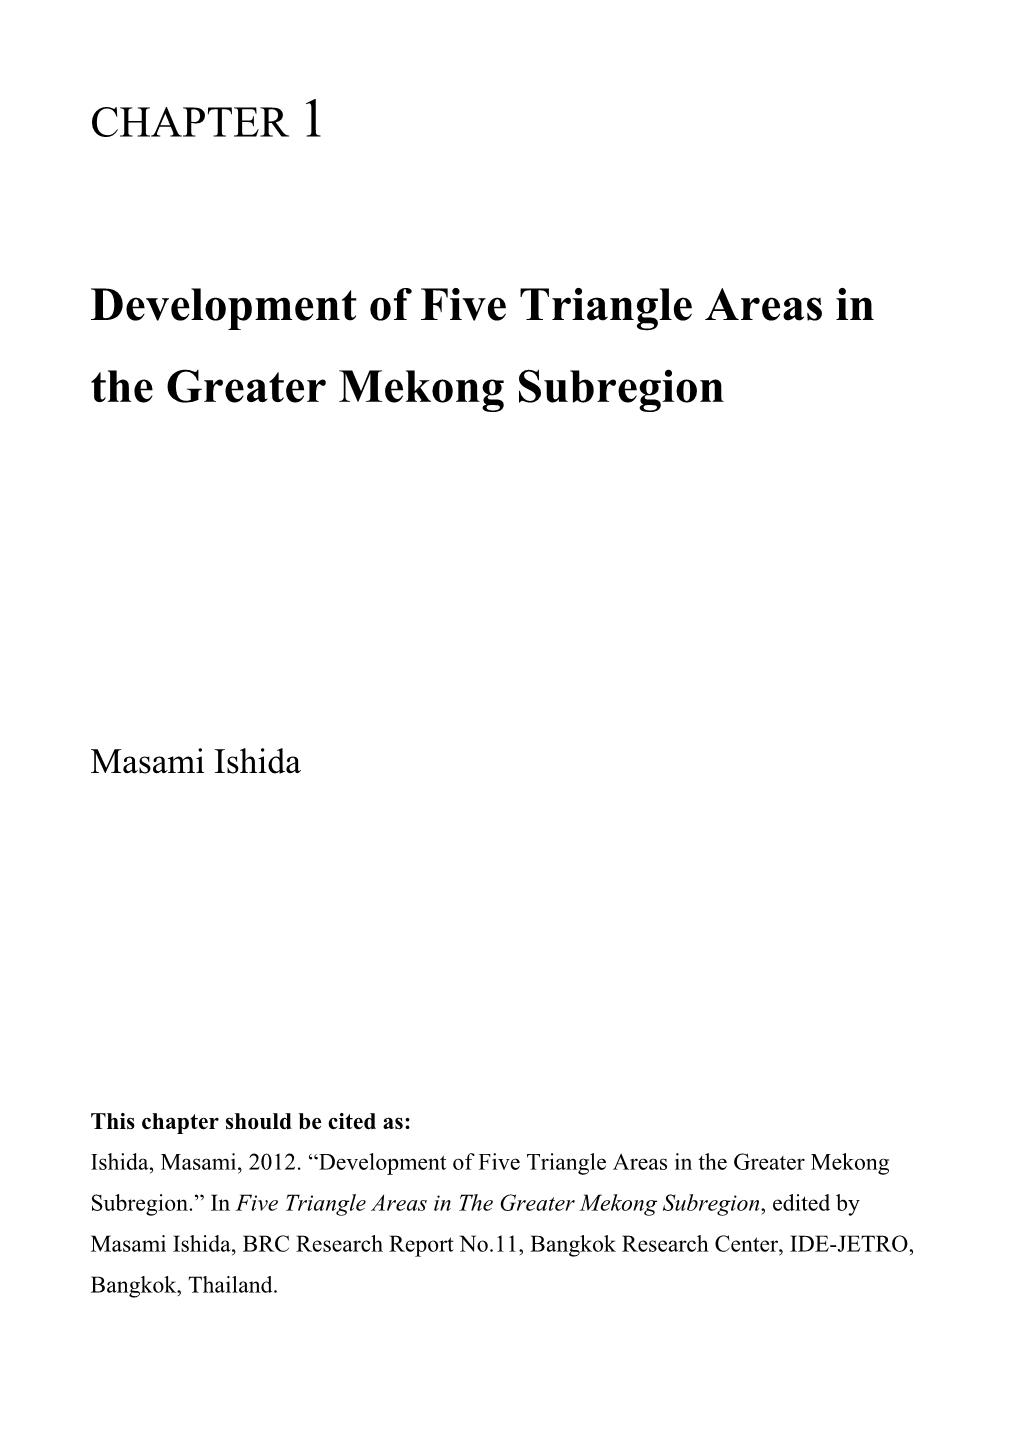 Development of Five Triangle Areas in the Greater Mekong Subregion